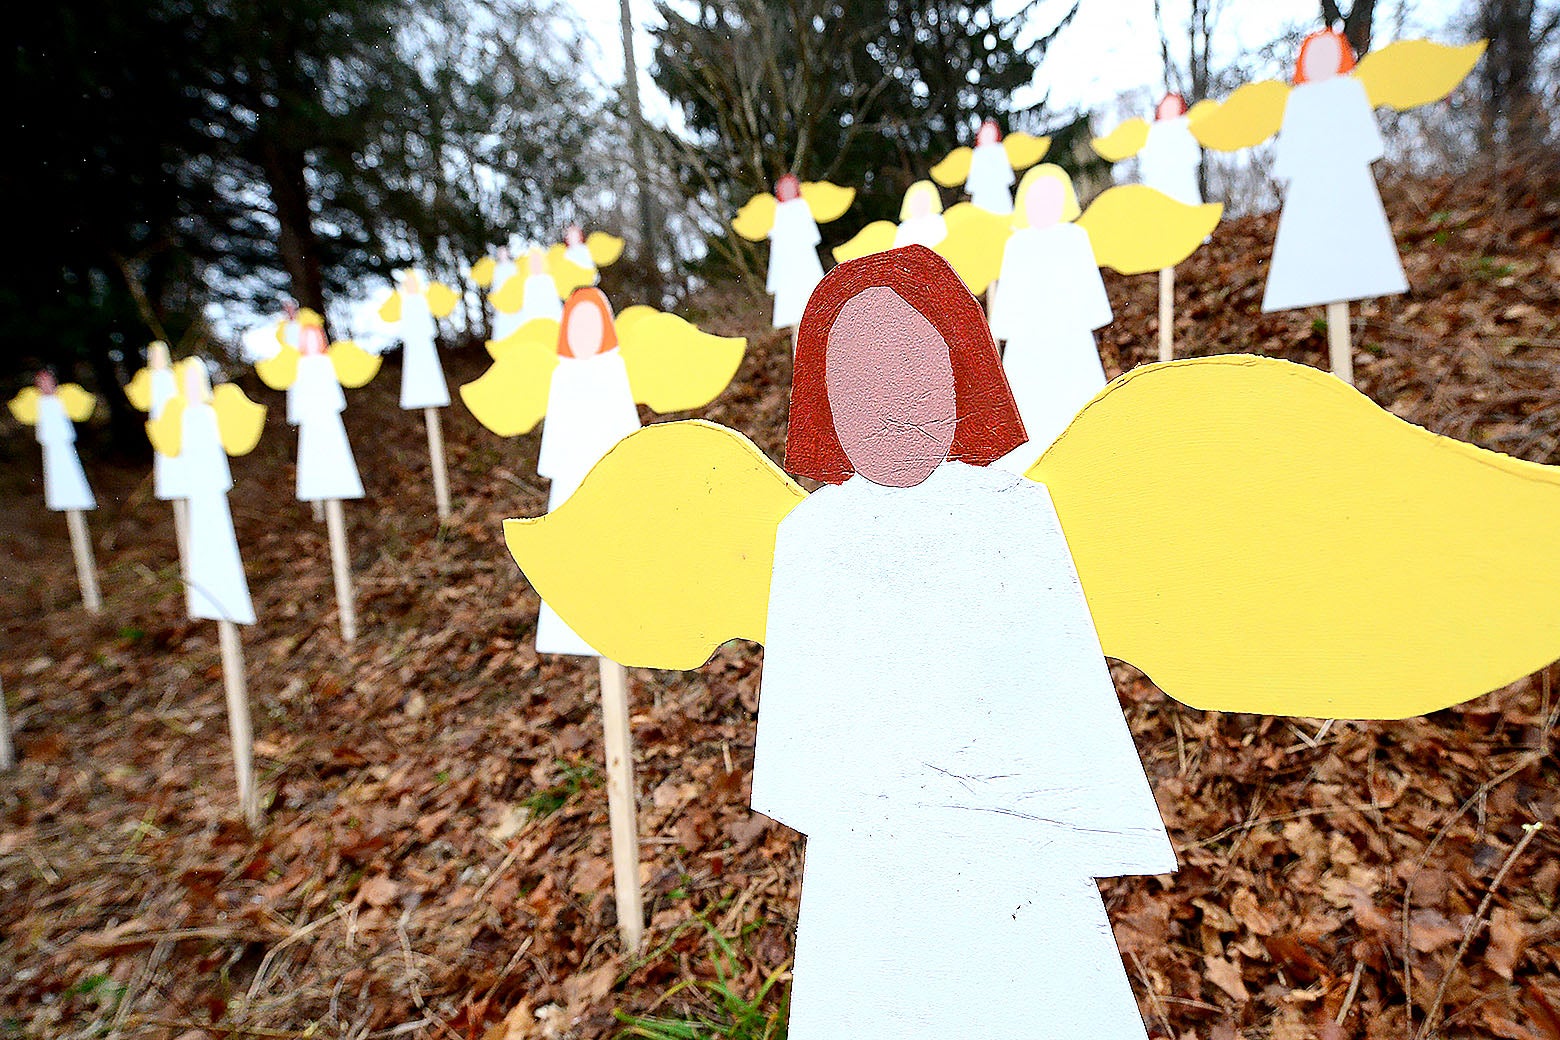 Wood cutouts of angels are seen posted on a small hill covered with fallen leaves.